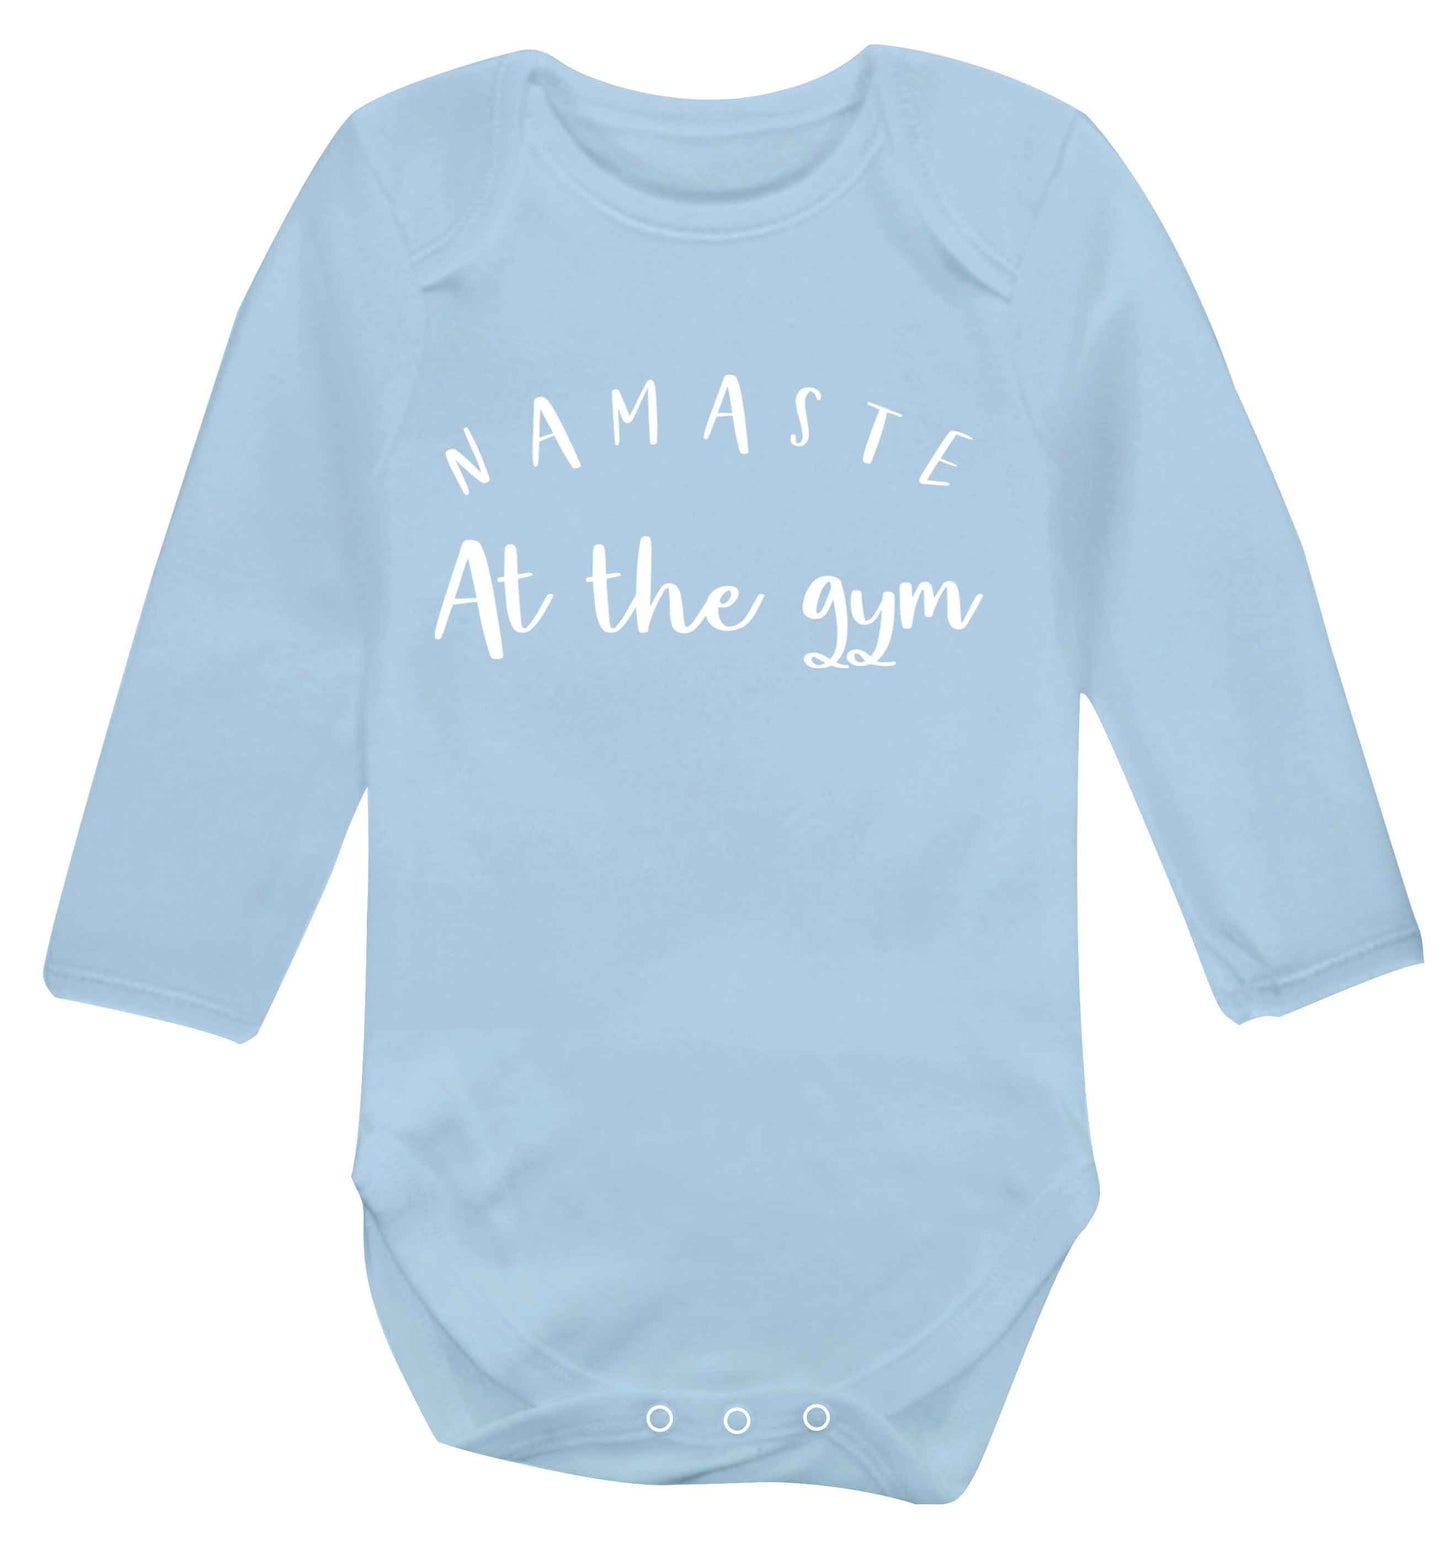 Namaste at the gym Baby Vest long sleeved pale blue 6-12 months